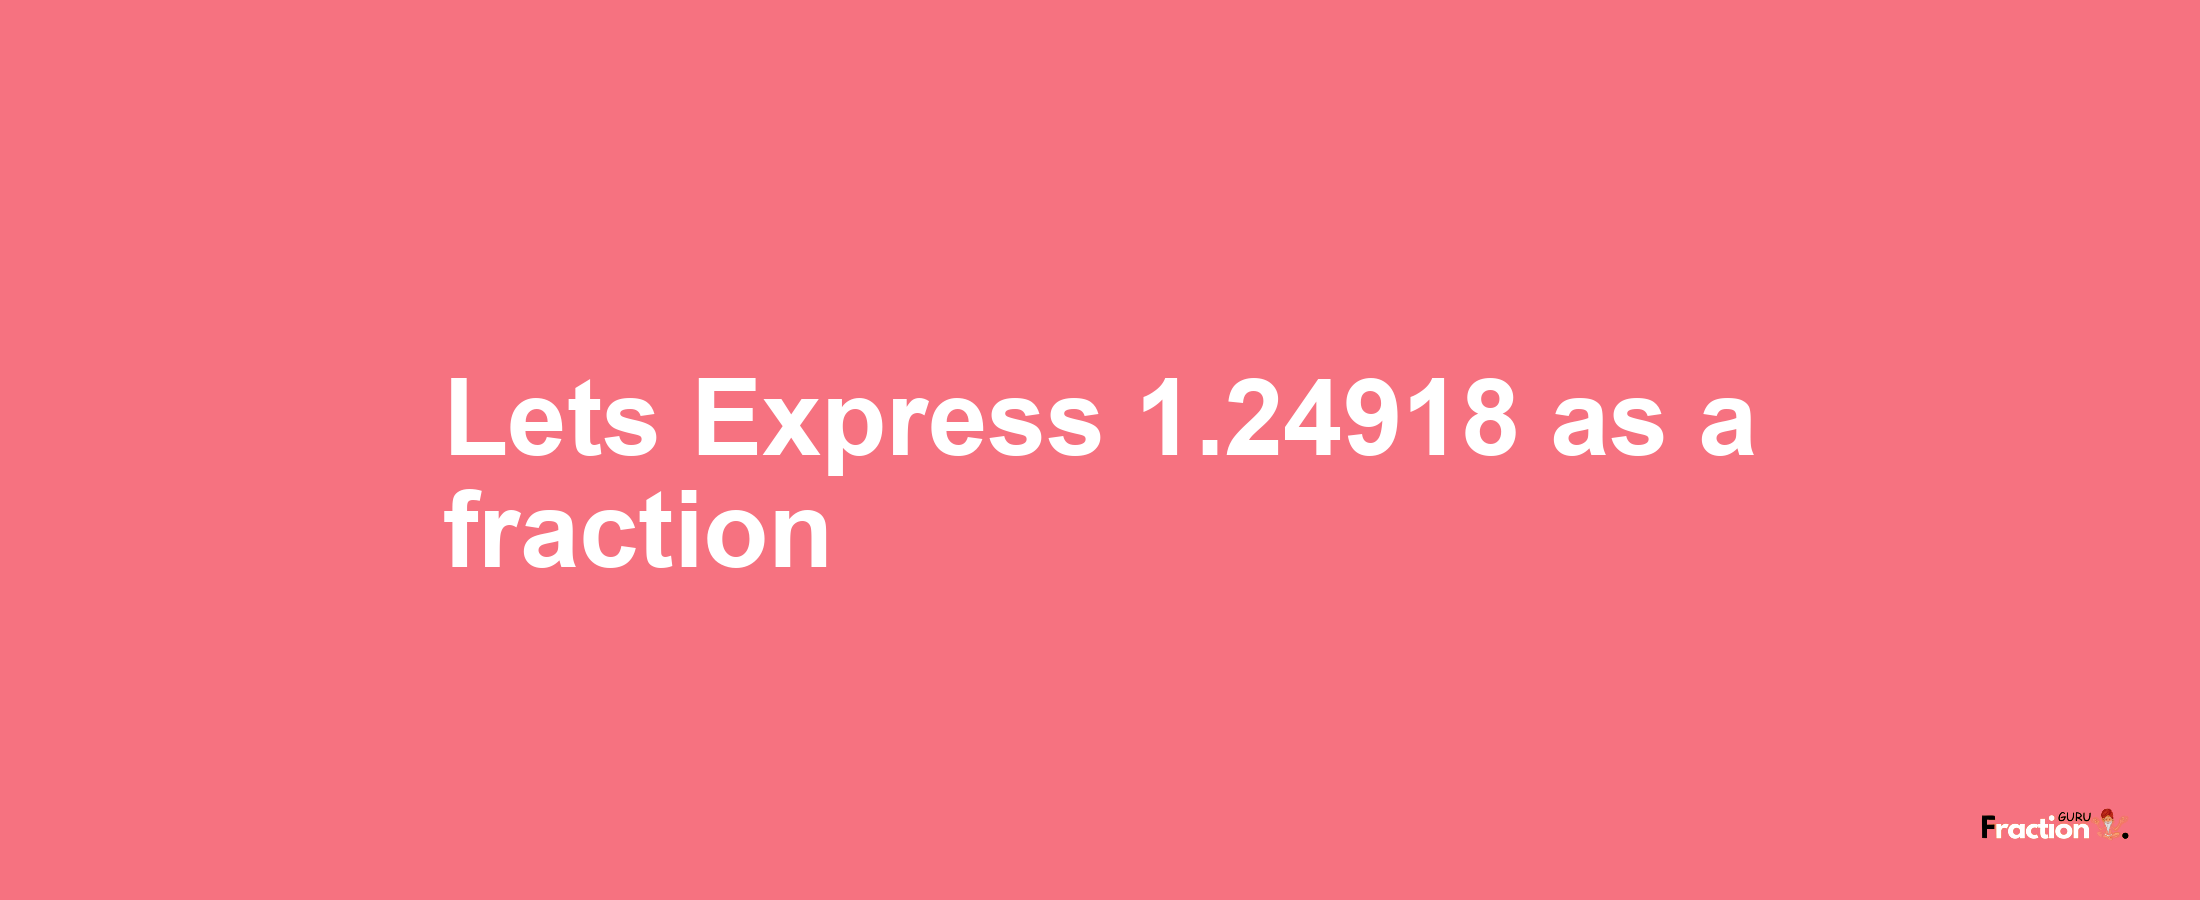 Lets Express 1.24918 as afraction